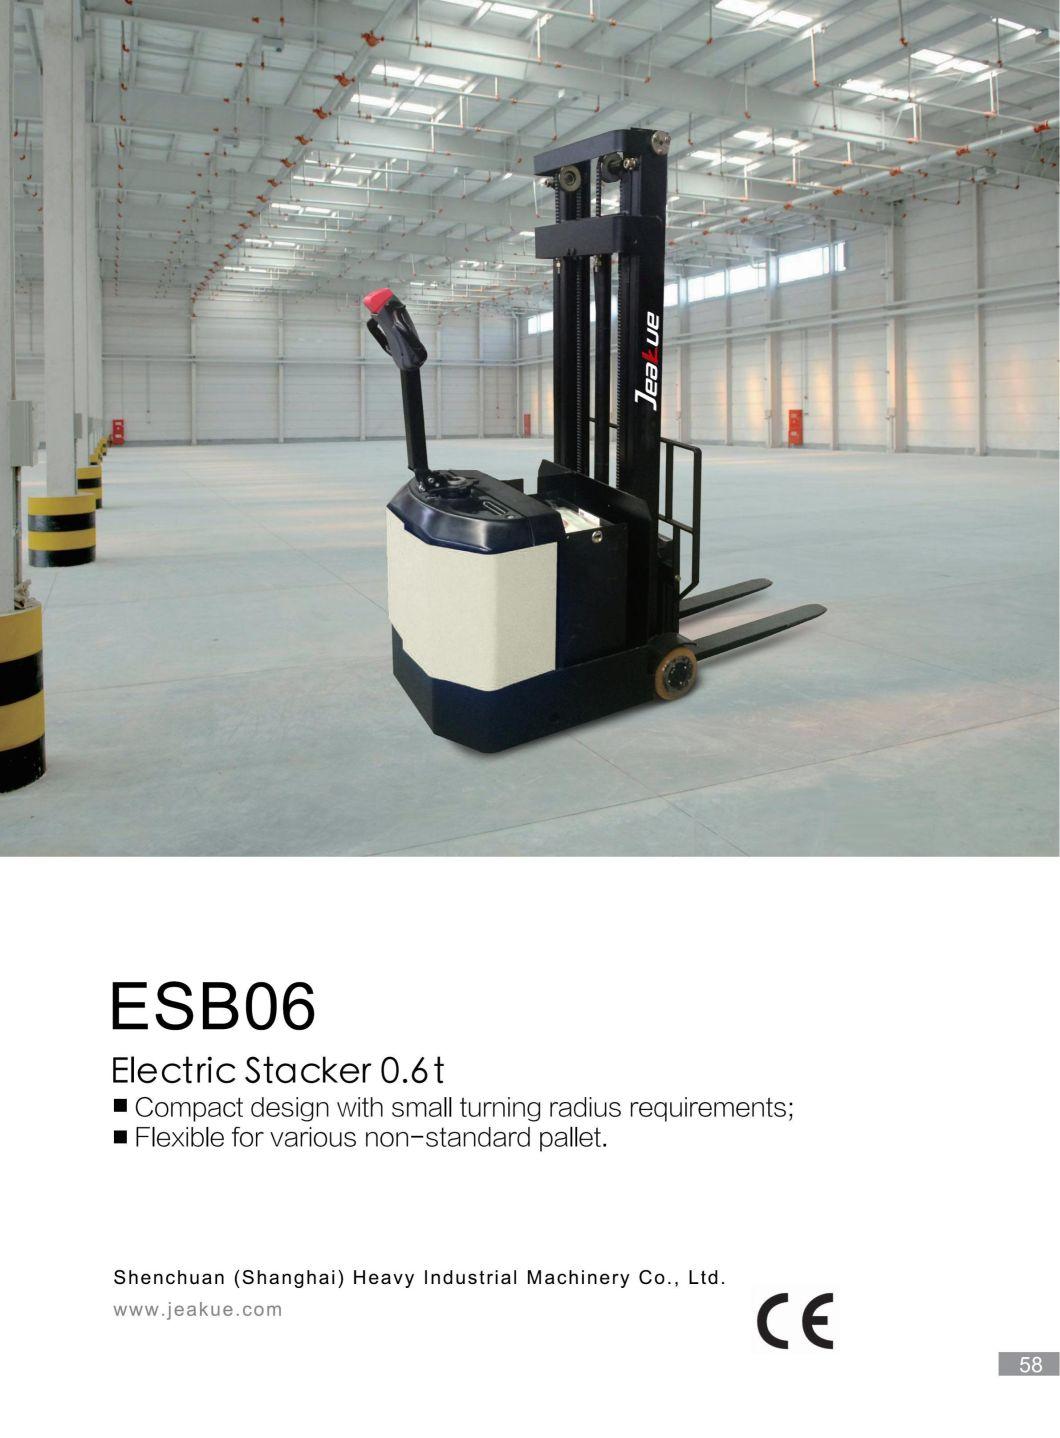 0.6t 600kg Compact Electric Counterbalance Electric Pallet Stacker